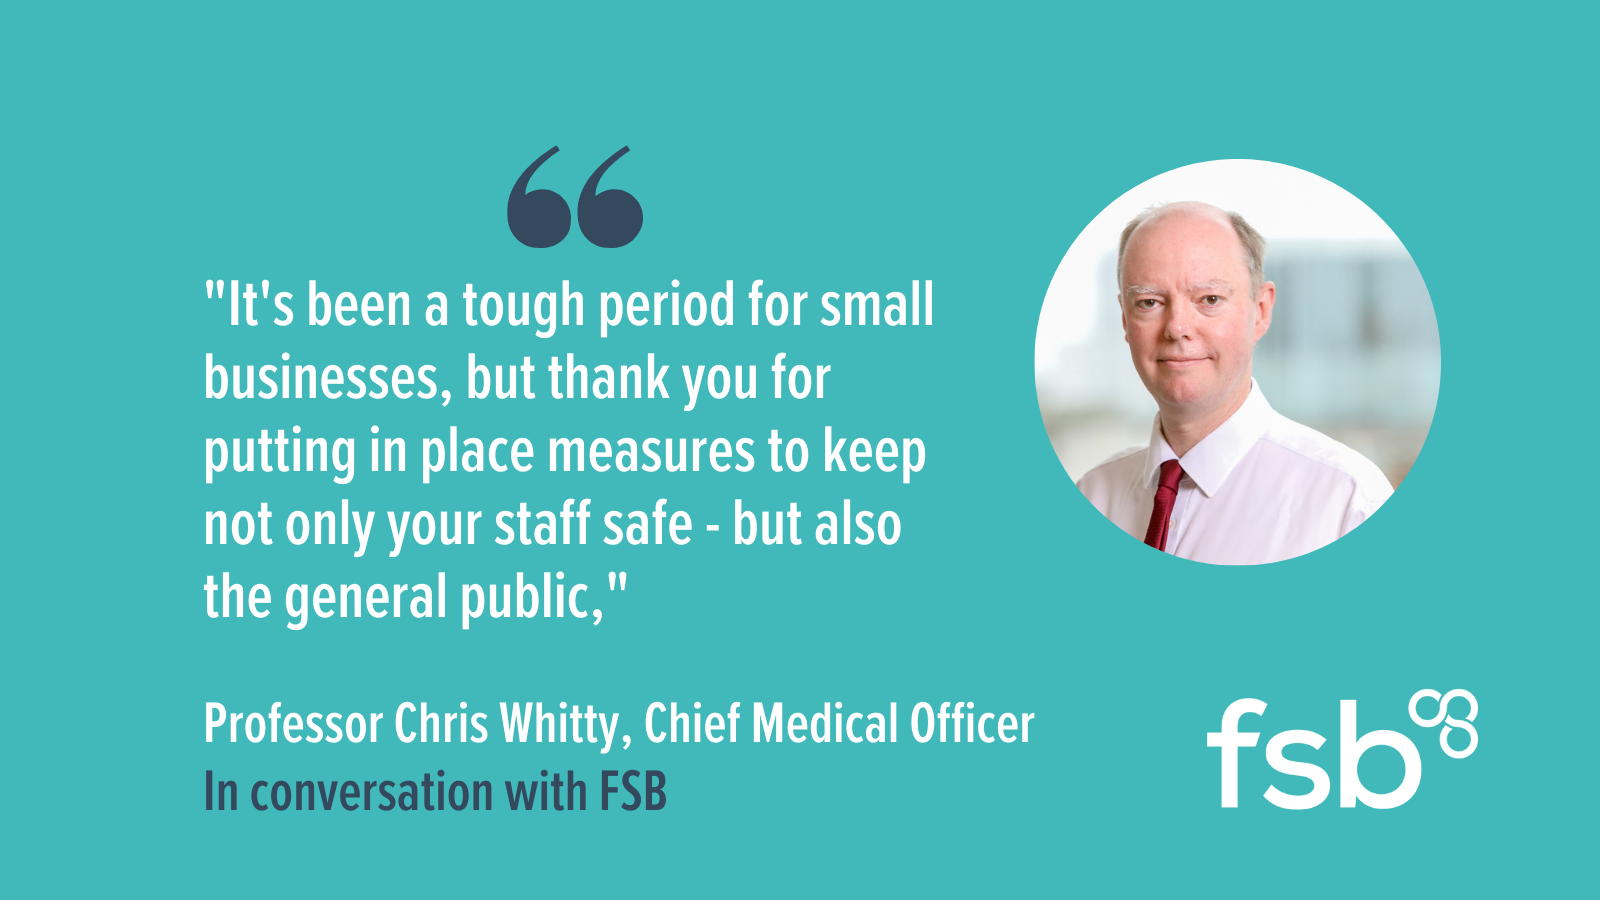 A quote from Chris Whitty " It's been a tough period for small businesses, but thank you for putting in place measures to keep not only your staff safe - but also the general public"